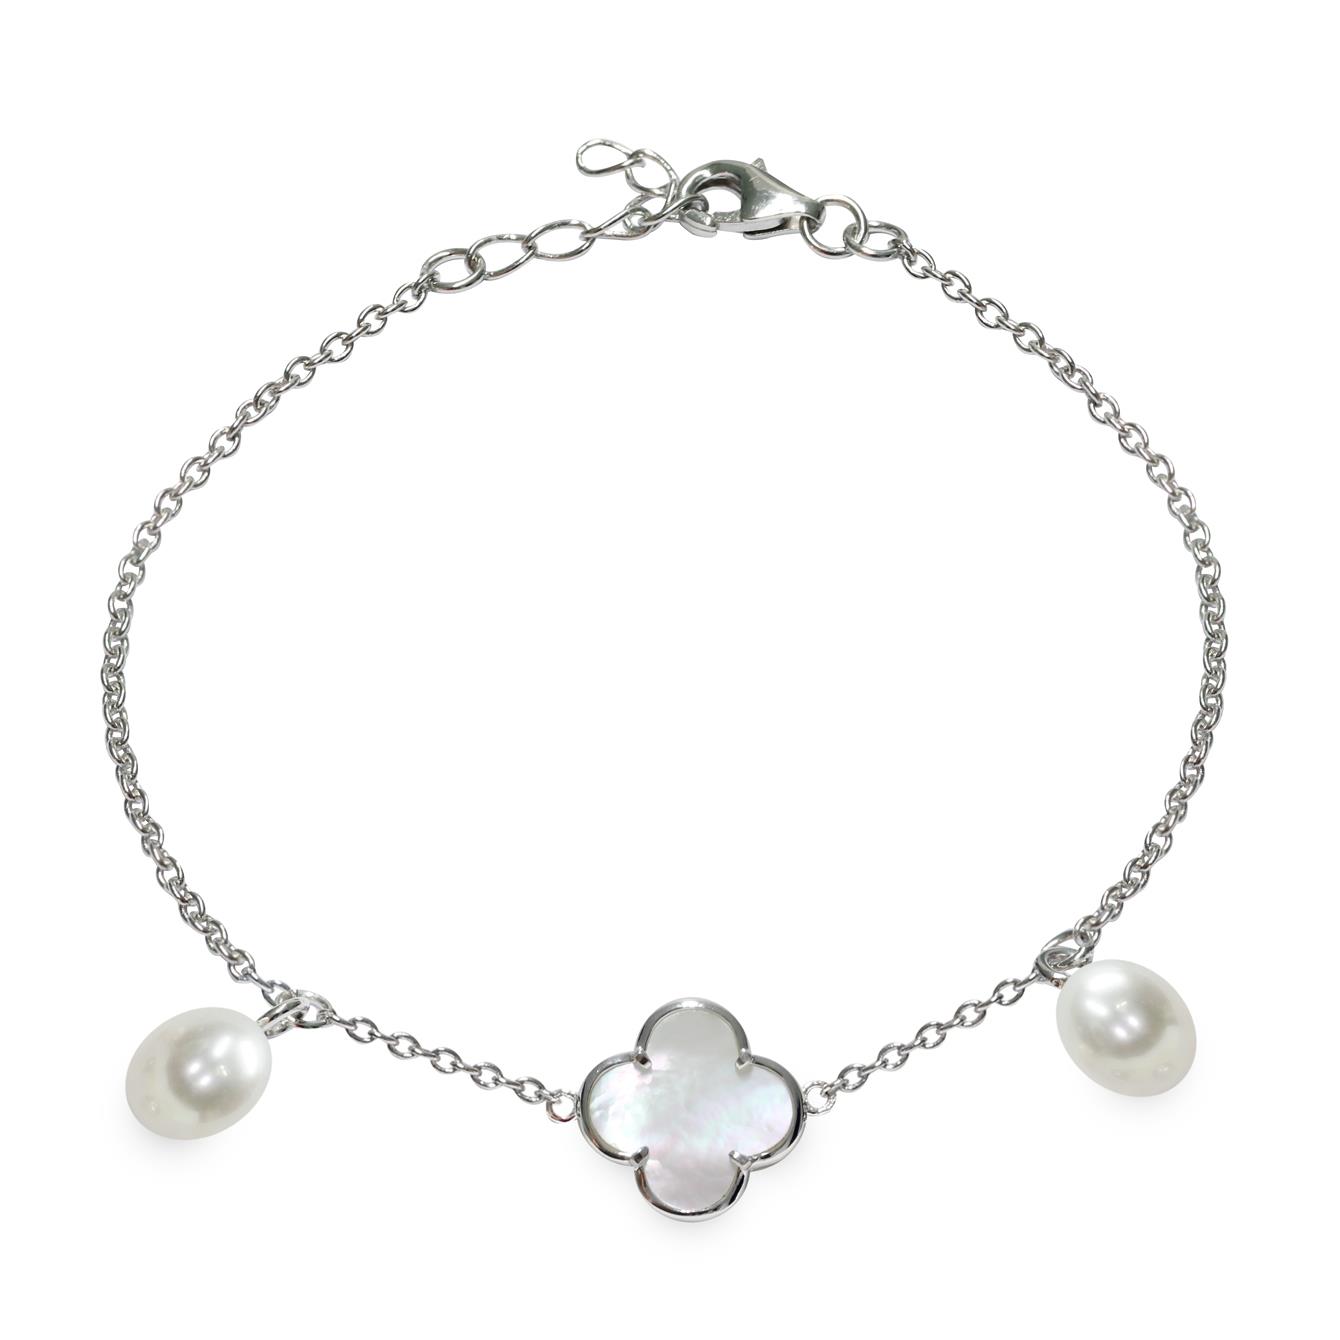 Silver bracelet with full pearls - MAYUMI